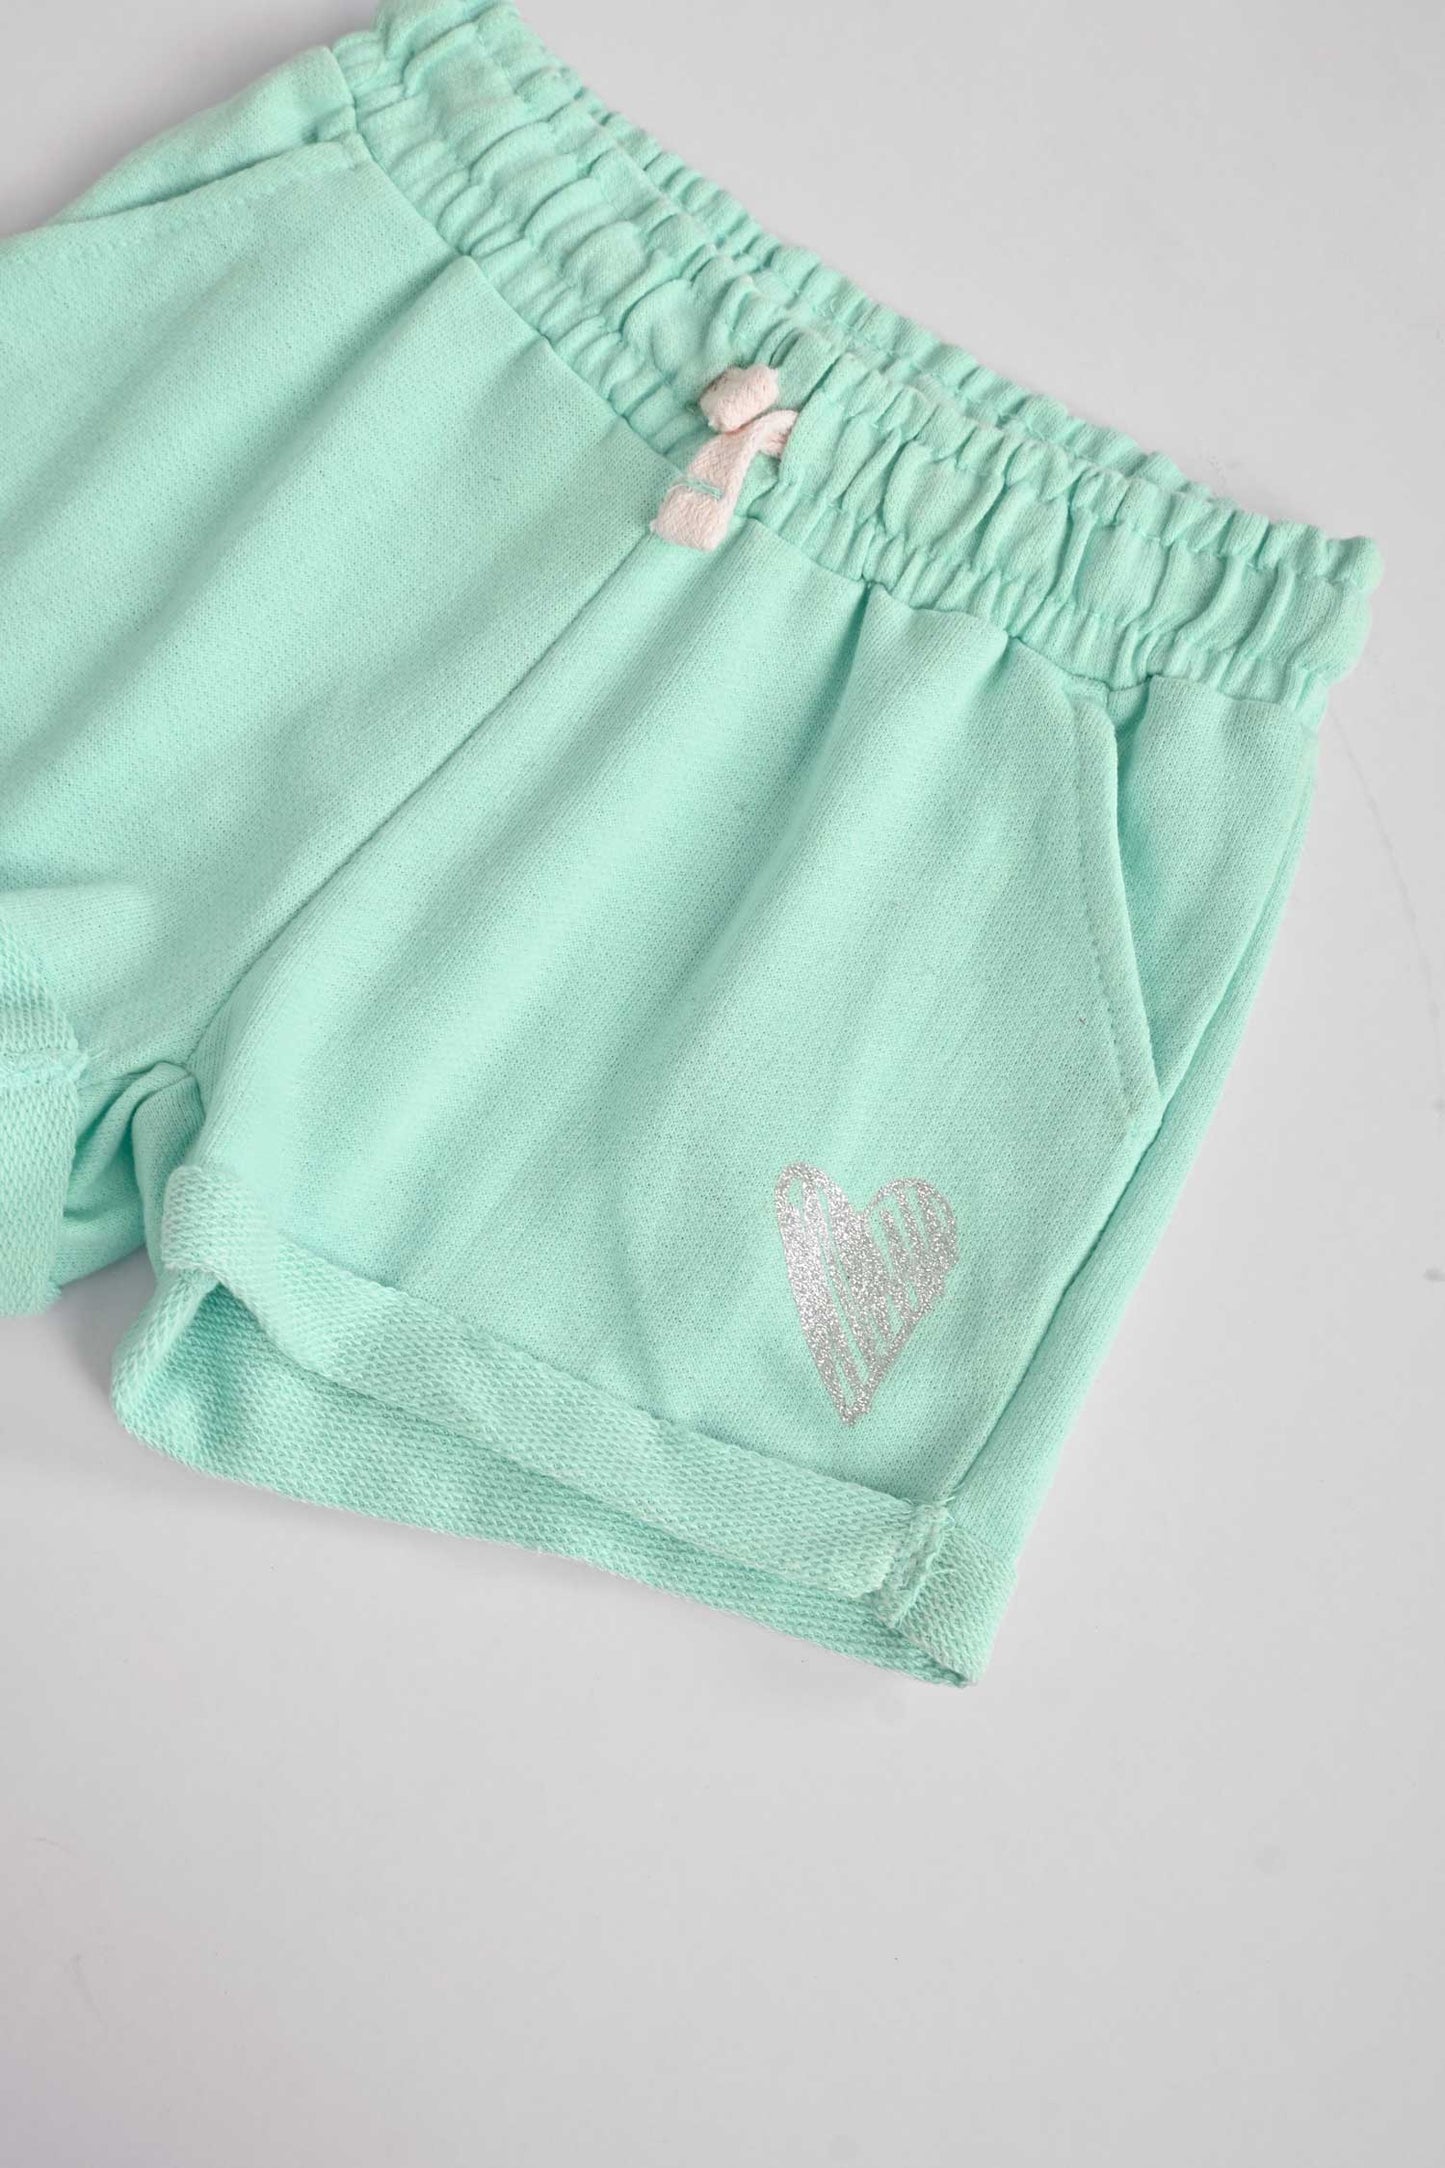 Tessential Kid's Glitter Heart Printed Minor Fault Terry Shorts 